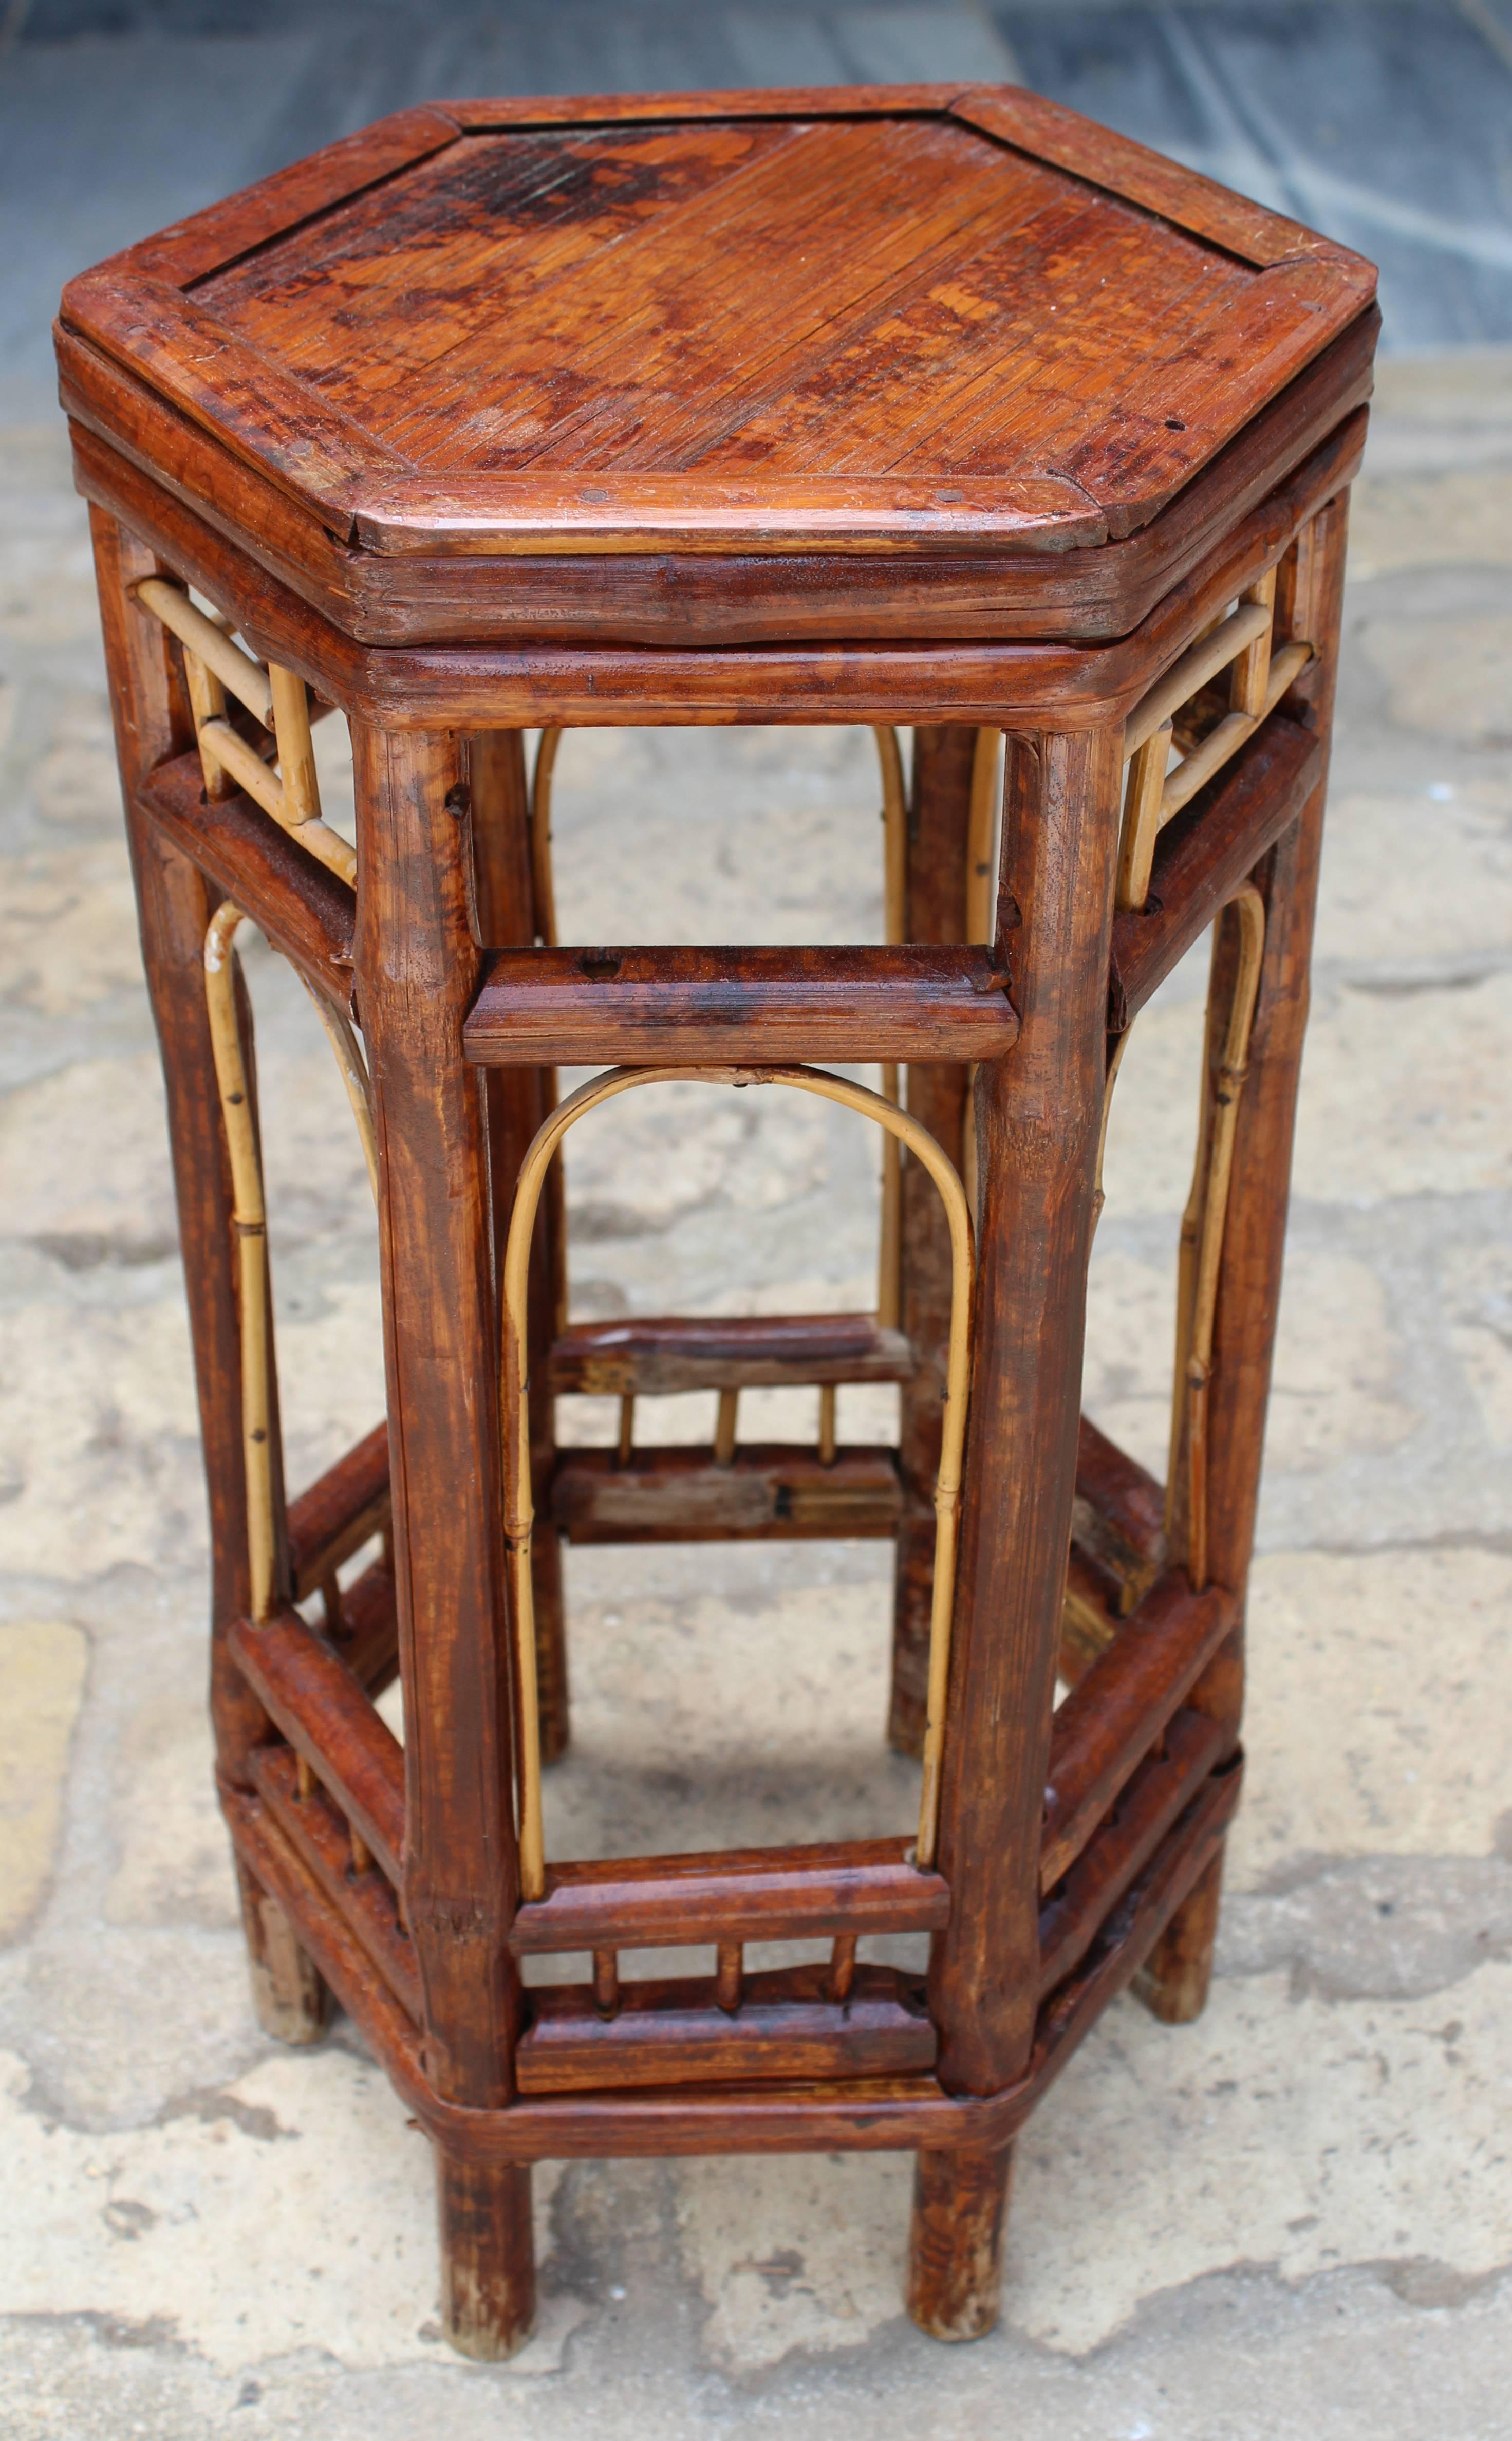 19th century Chinese octagonal bamboo auxiliary table in its original color.